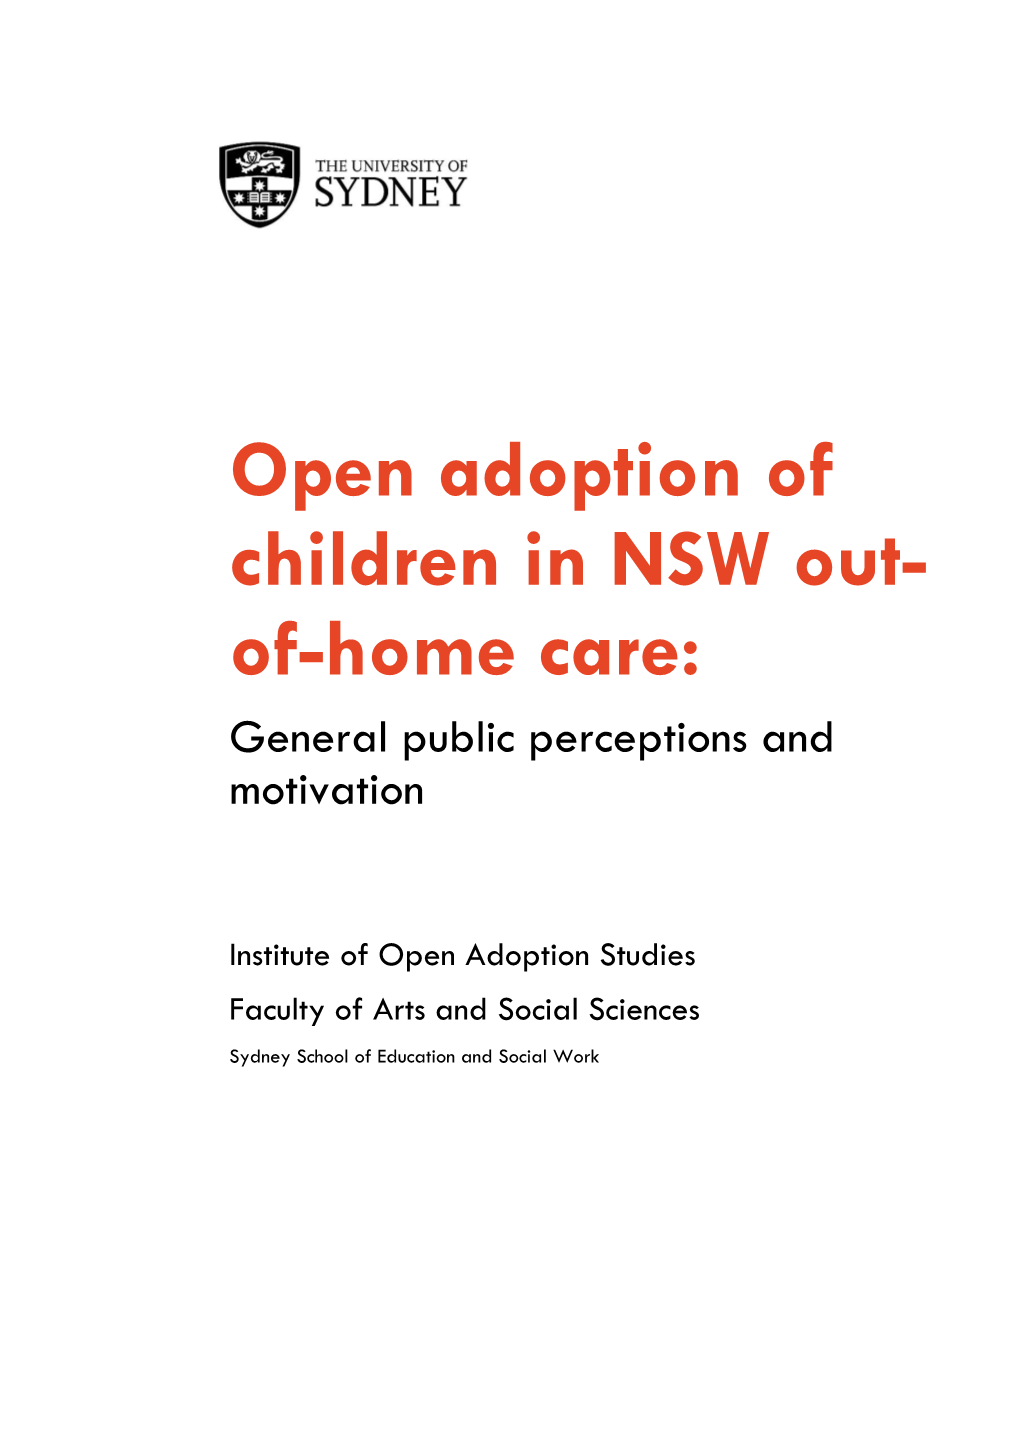 Open Adoption of Children in NSW Out- Of-Home Care: General Public Perceptions and Motivation